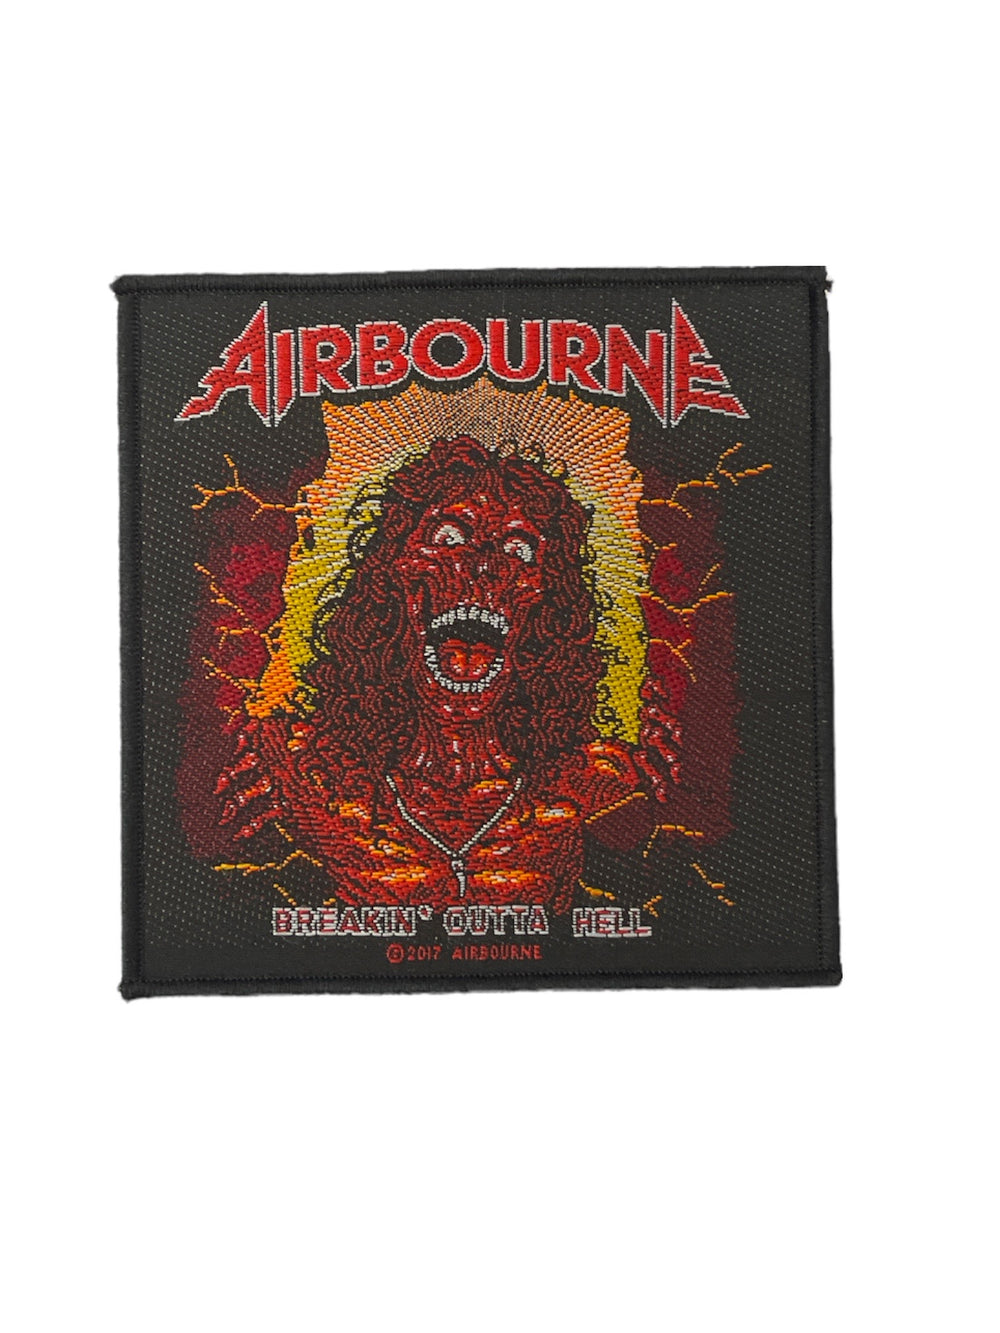 Airbourne Breakin Outta Official Sew On Woven Patch Brand New